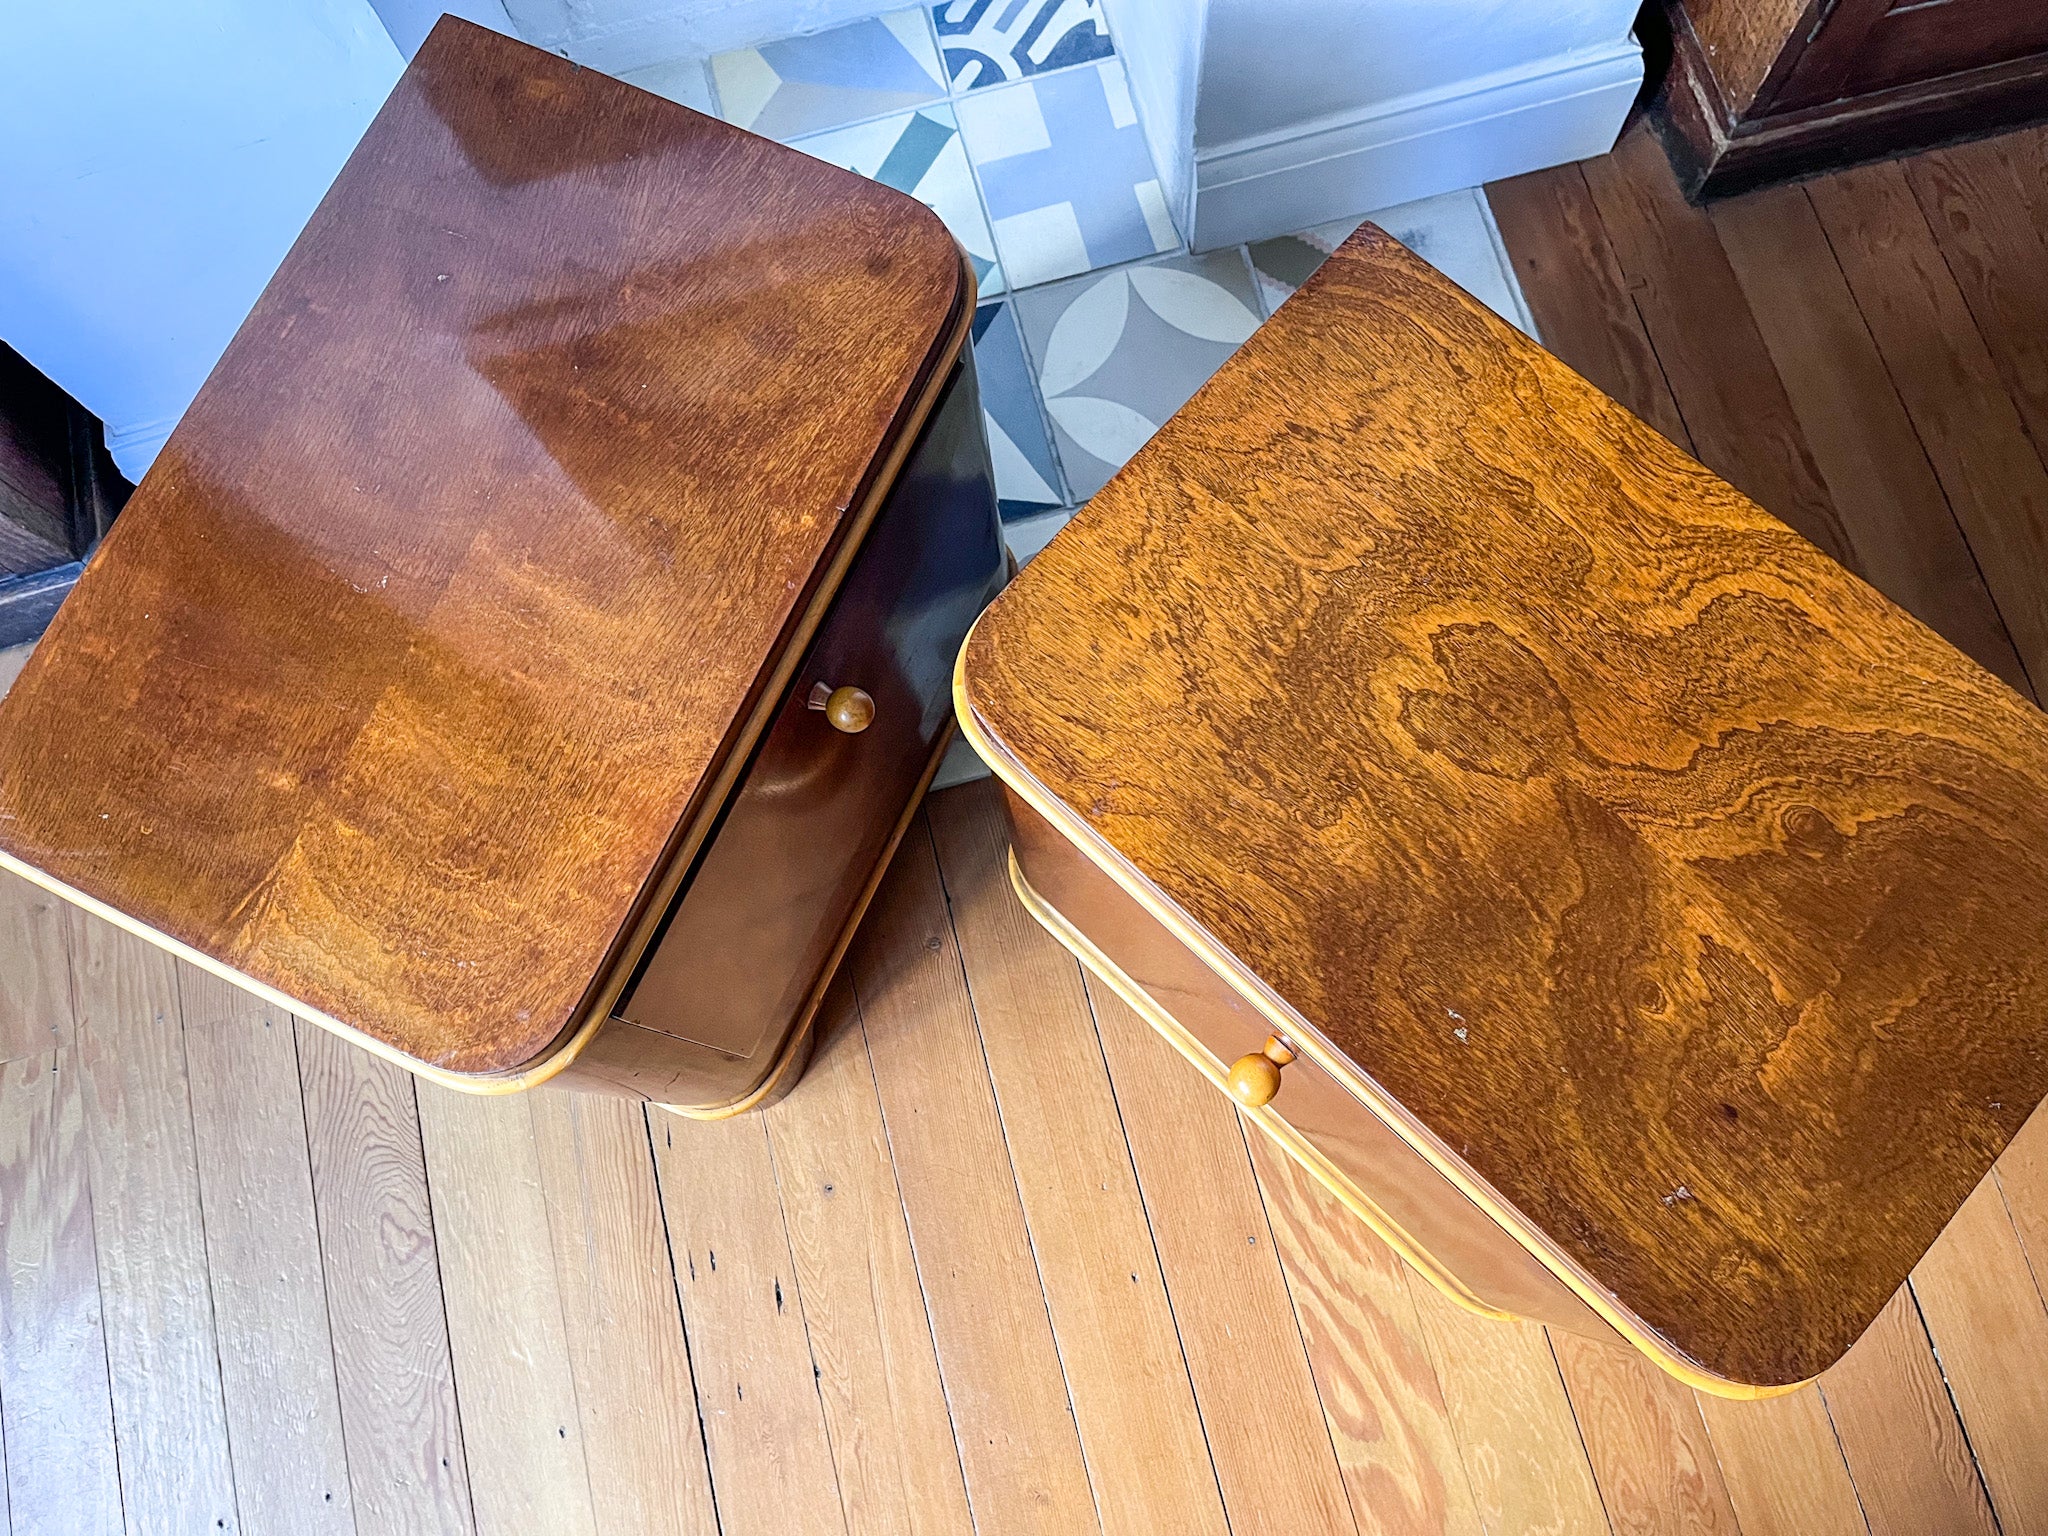 A Pair Of Vintage Art Deco Bedside Cabinets